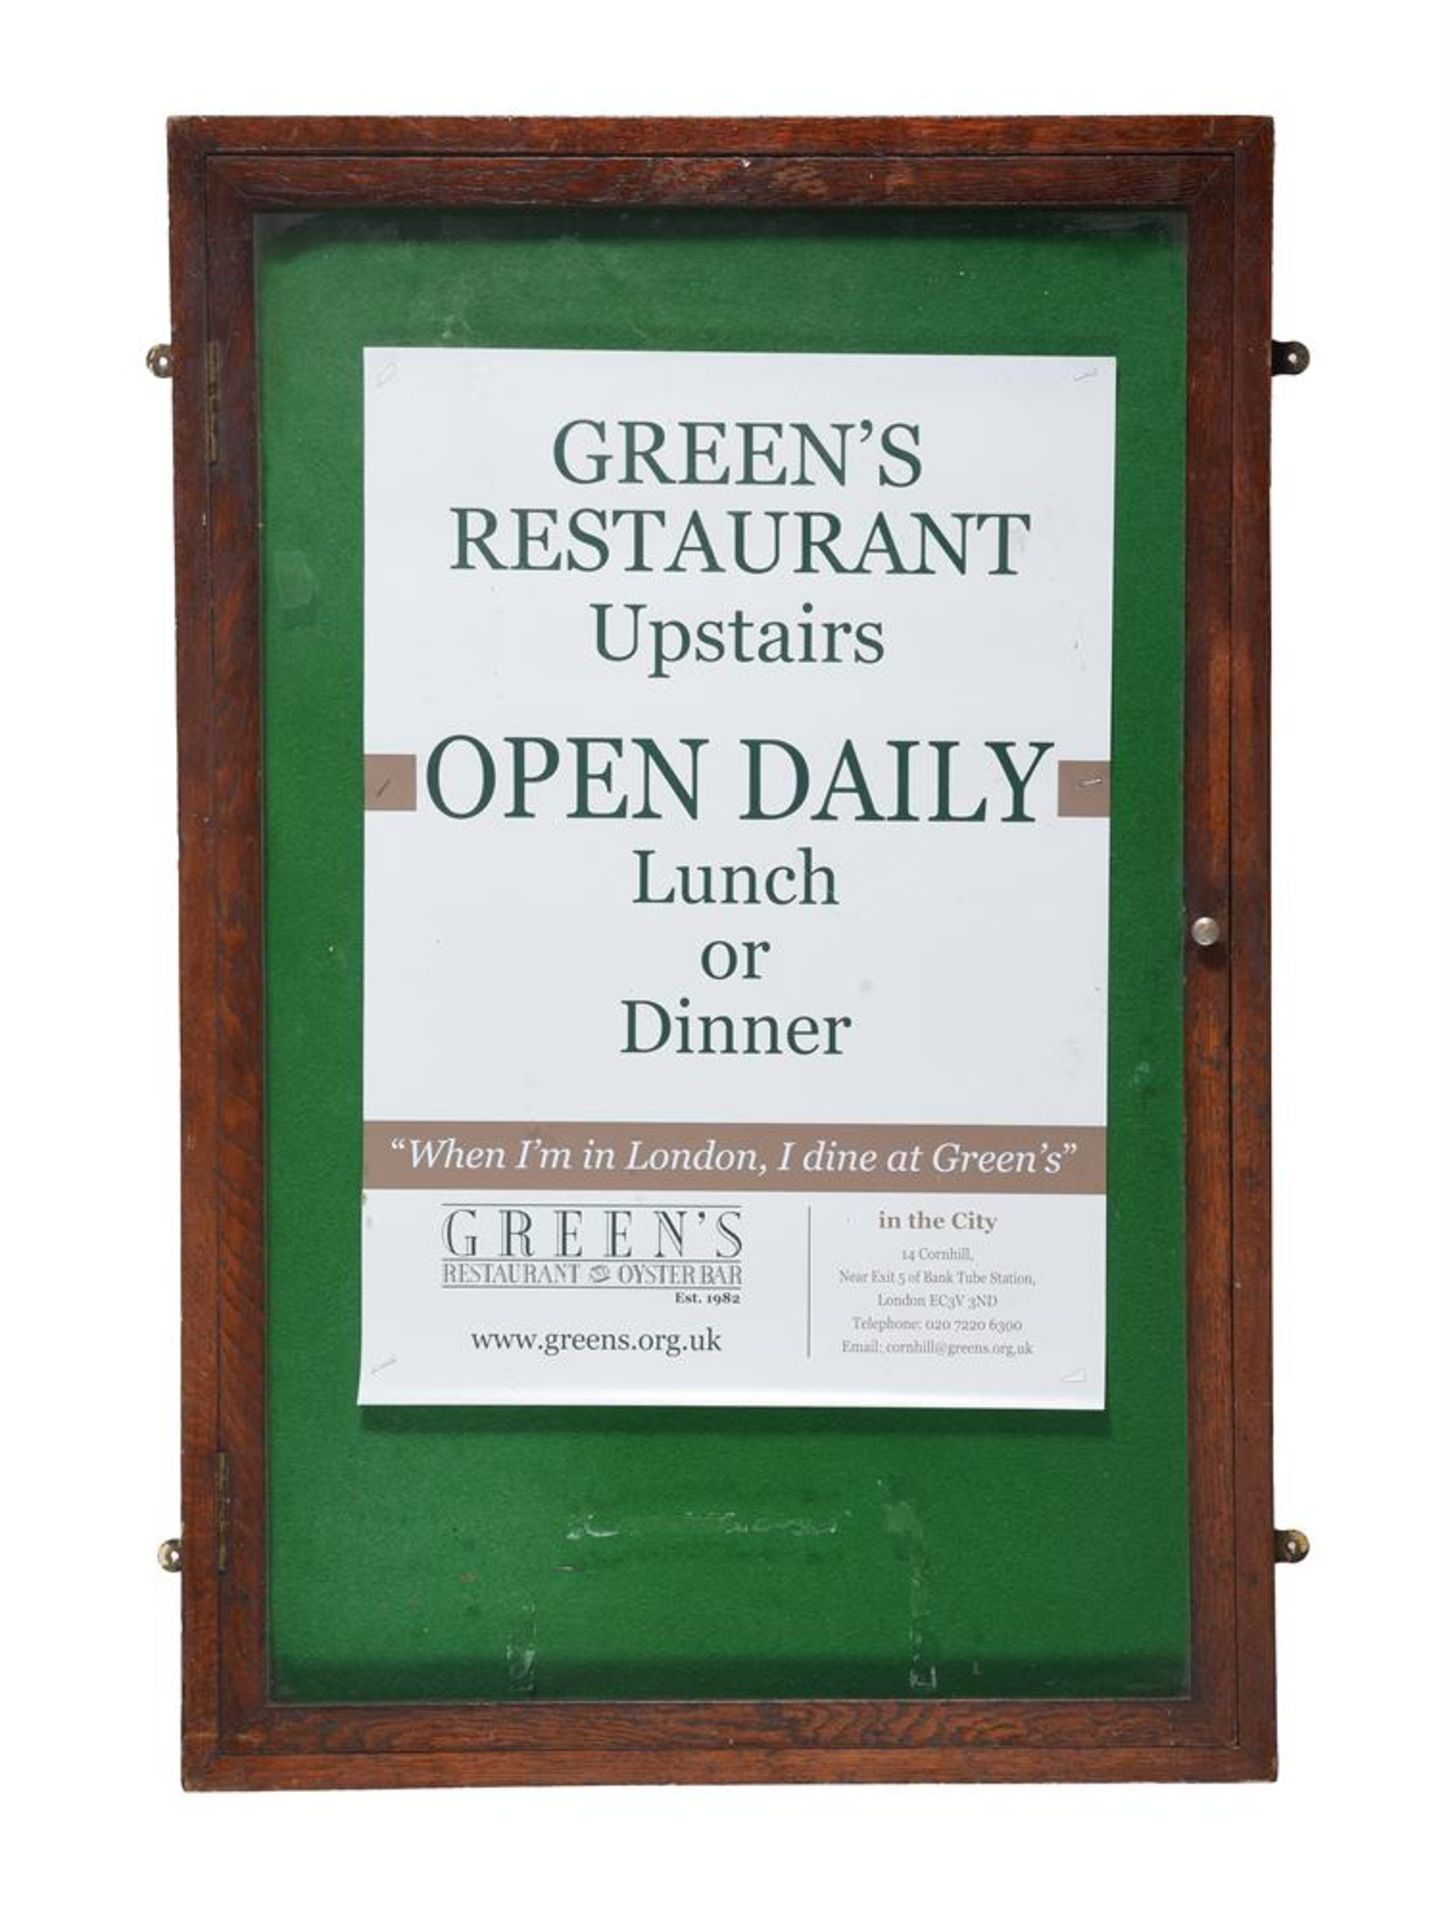 Green's Junior Rotter's dinner menu, 7th March 1985 - Image 3 of 6